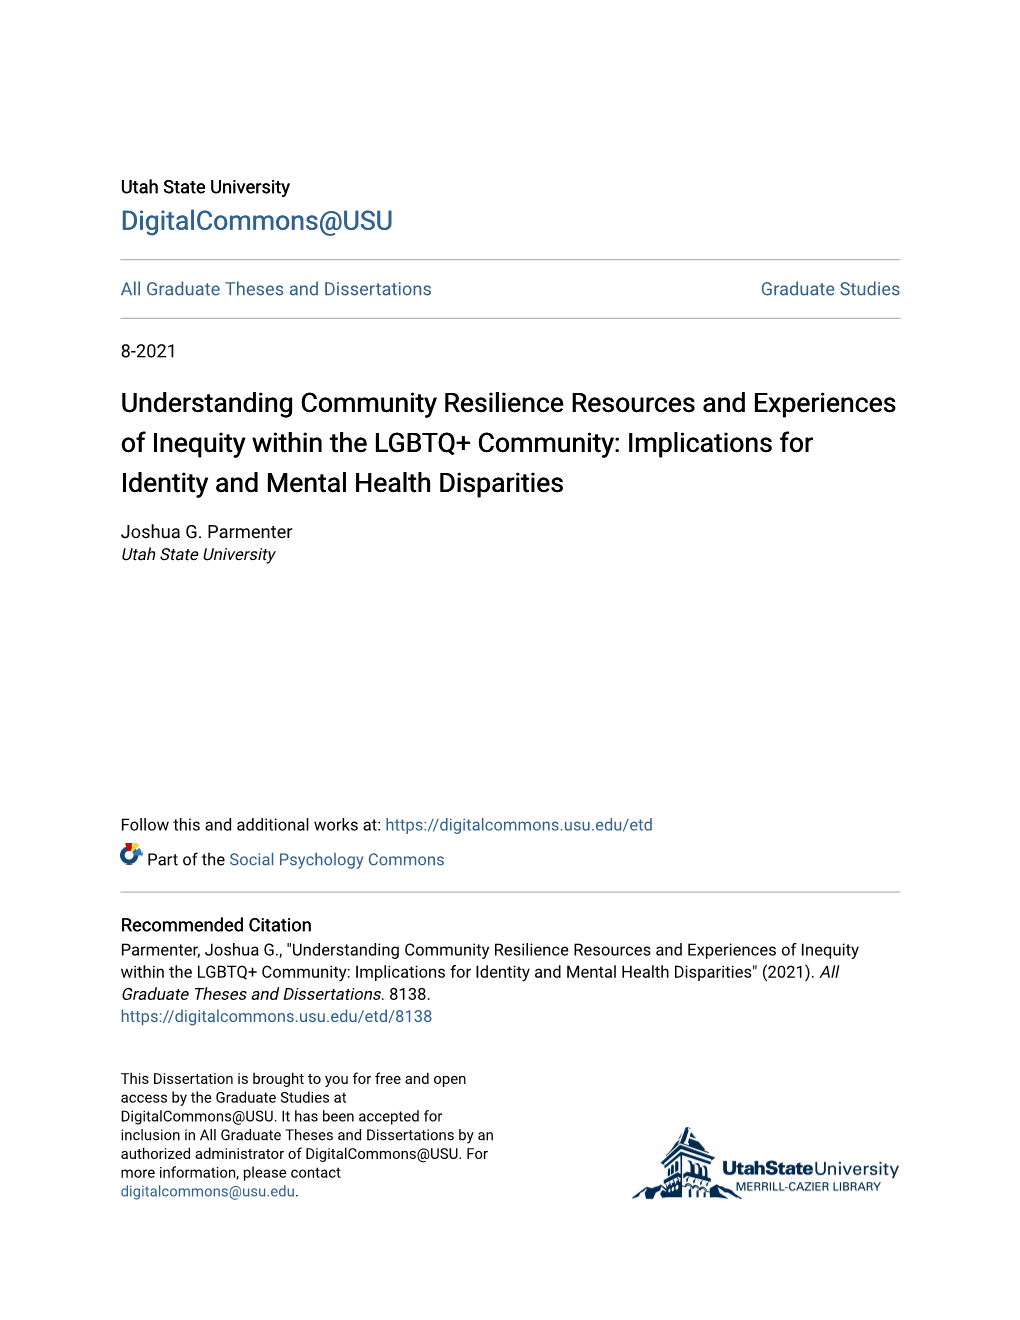 Understanding Community Resilience Resources and Experiences of Inequity Within the LGBTQ+ Community: Implications for Identity and Mental Health Disparities